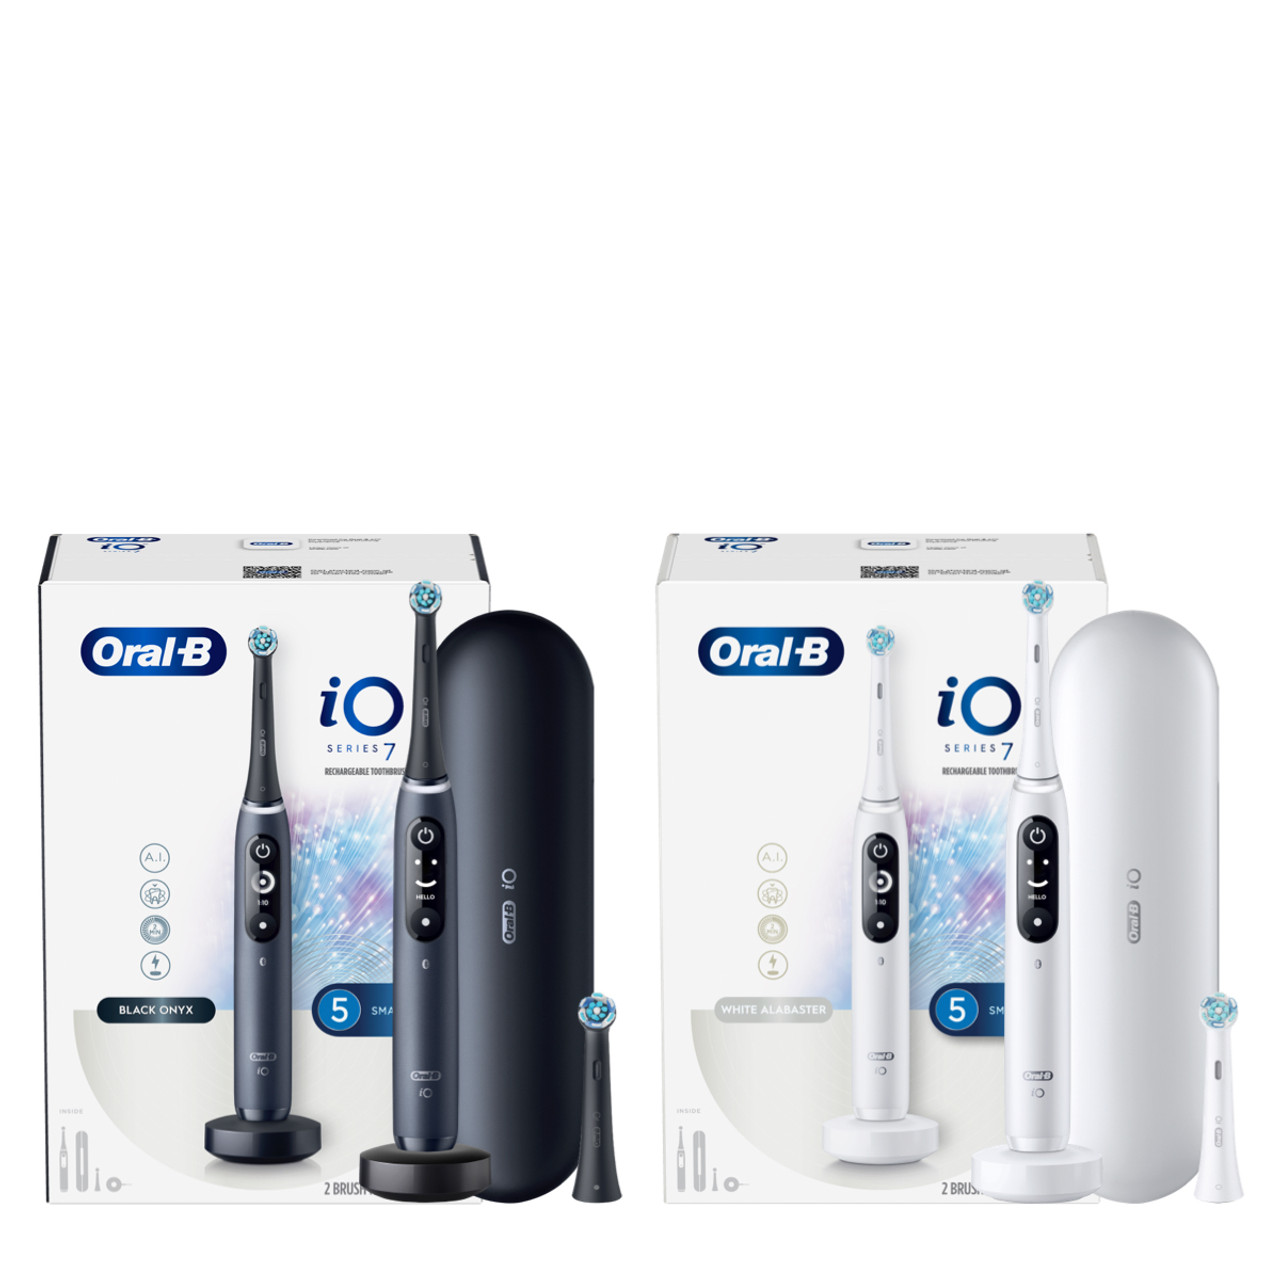 Oral-B iO Series 7 Toothbrush Oral-B Pack Electric | Twin